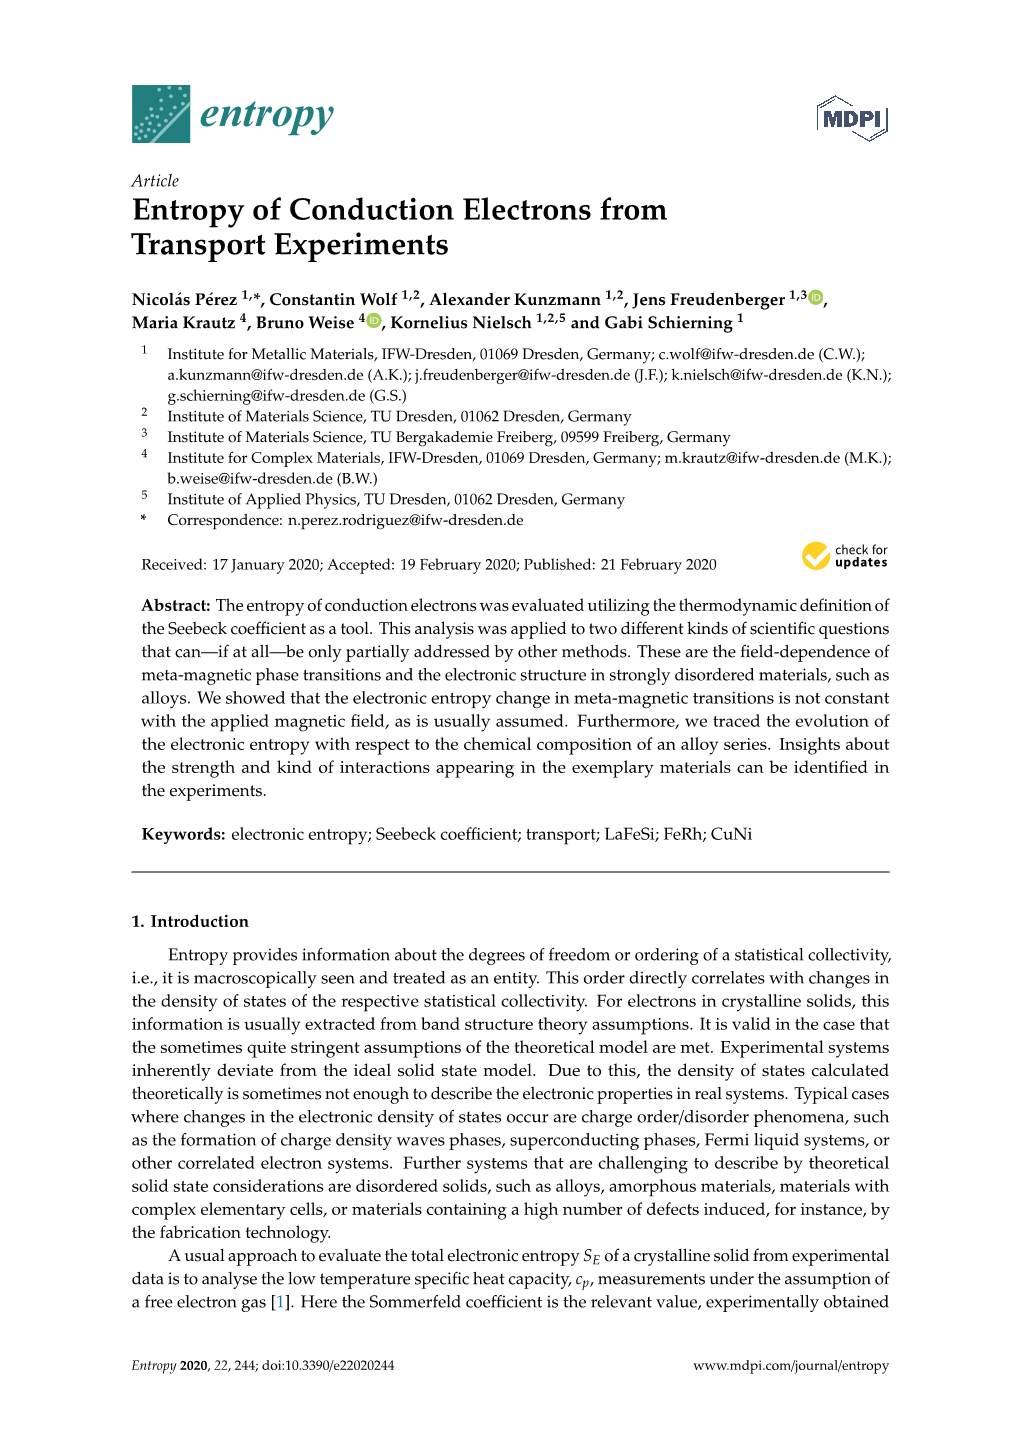 Entropy of Conduction Electrons from Transport Experiments